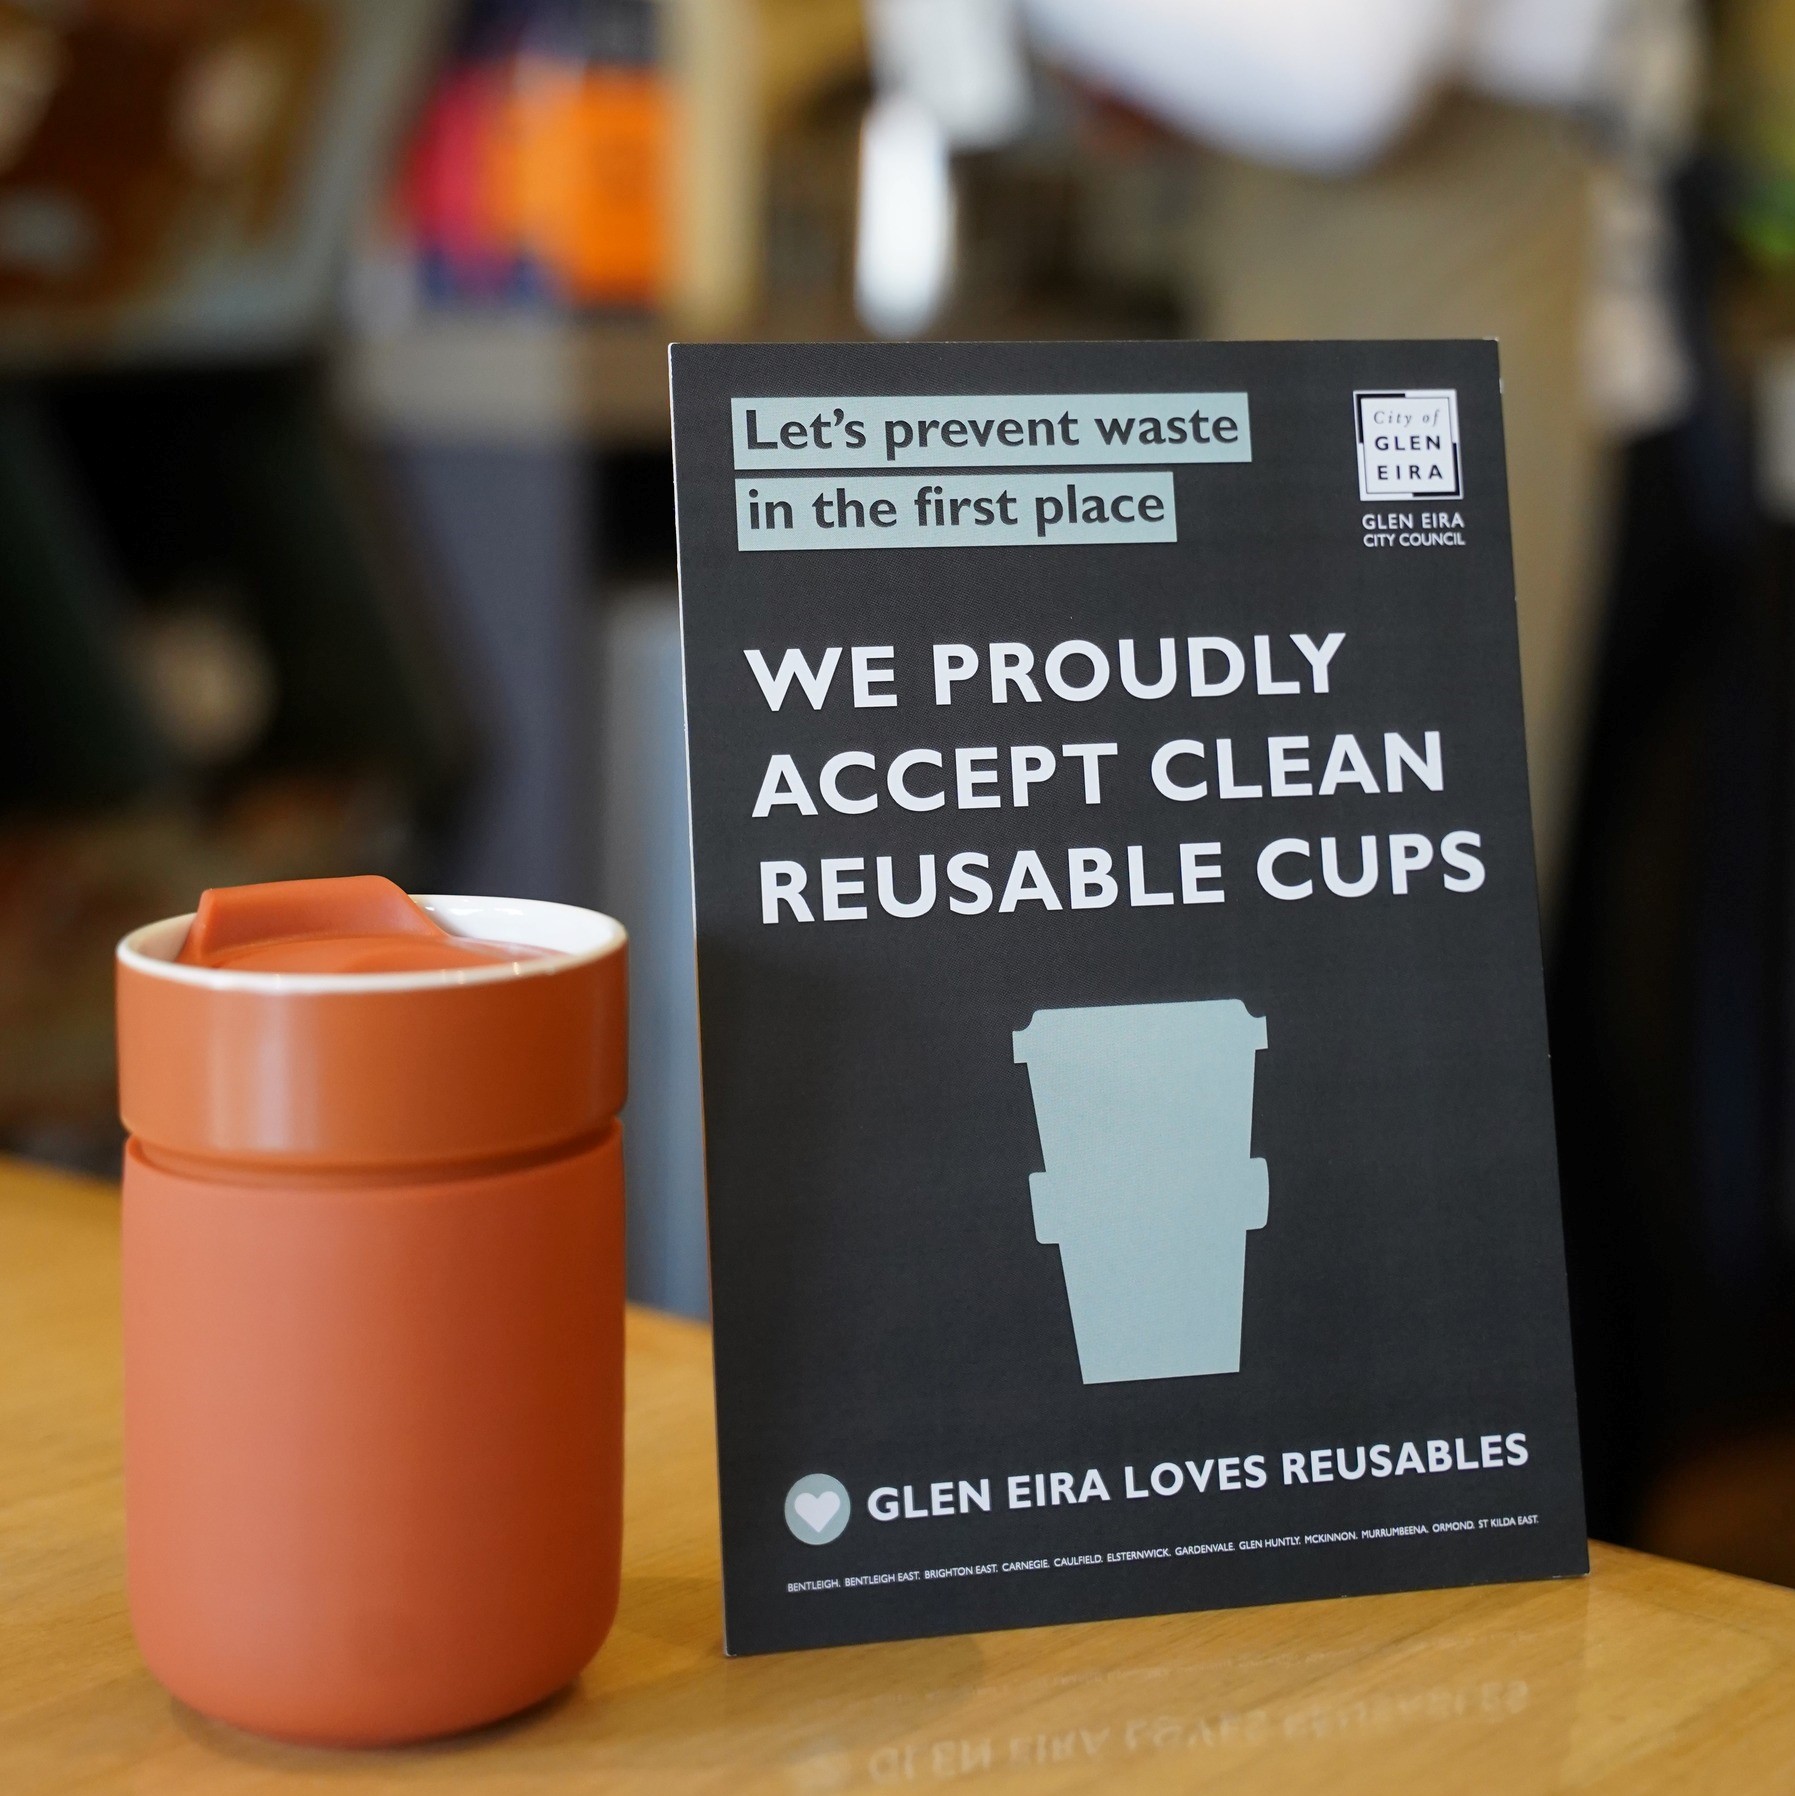 Local cafes can display a free sign to encourage reusables and reduce waste from single-use cups.